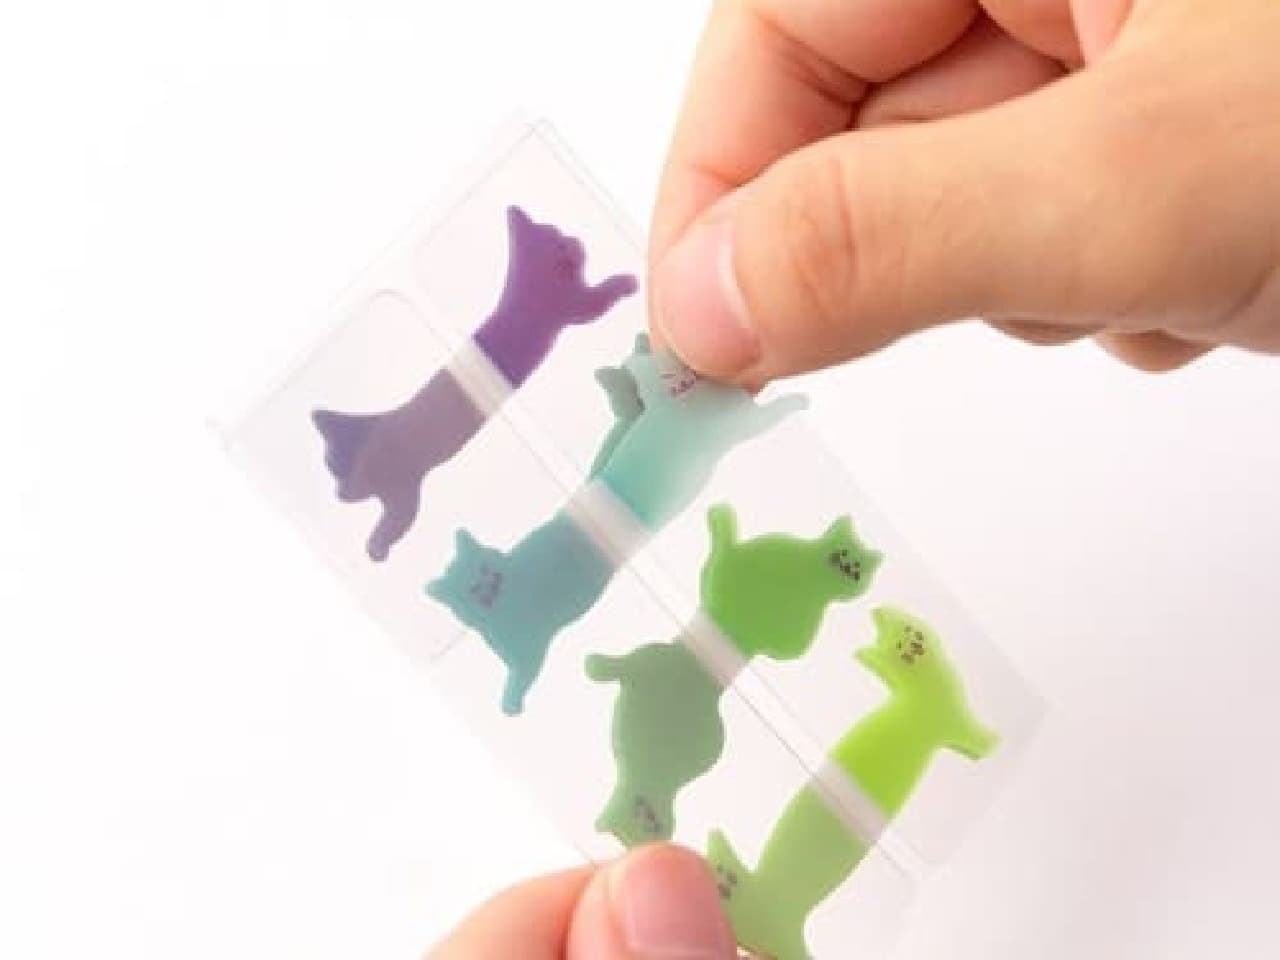 Animal motif sticky note "with index film"